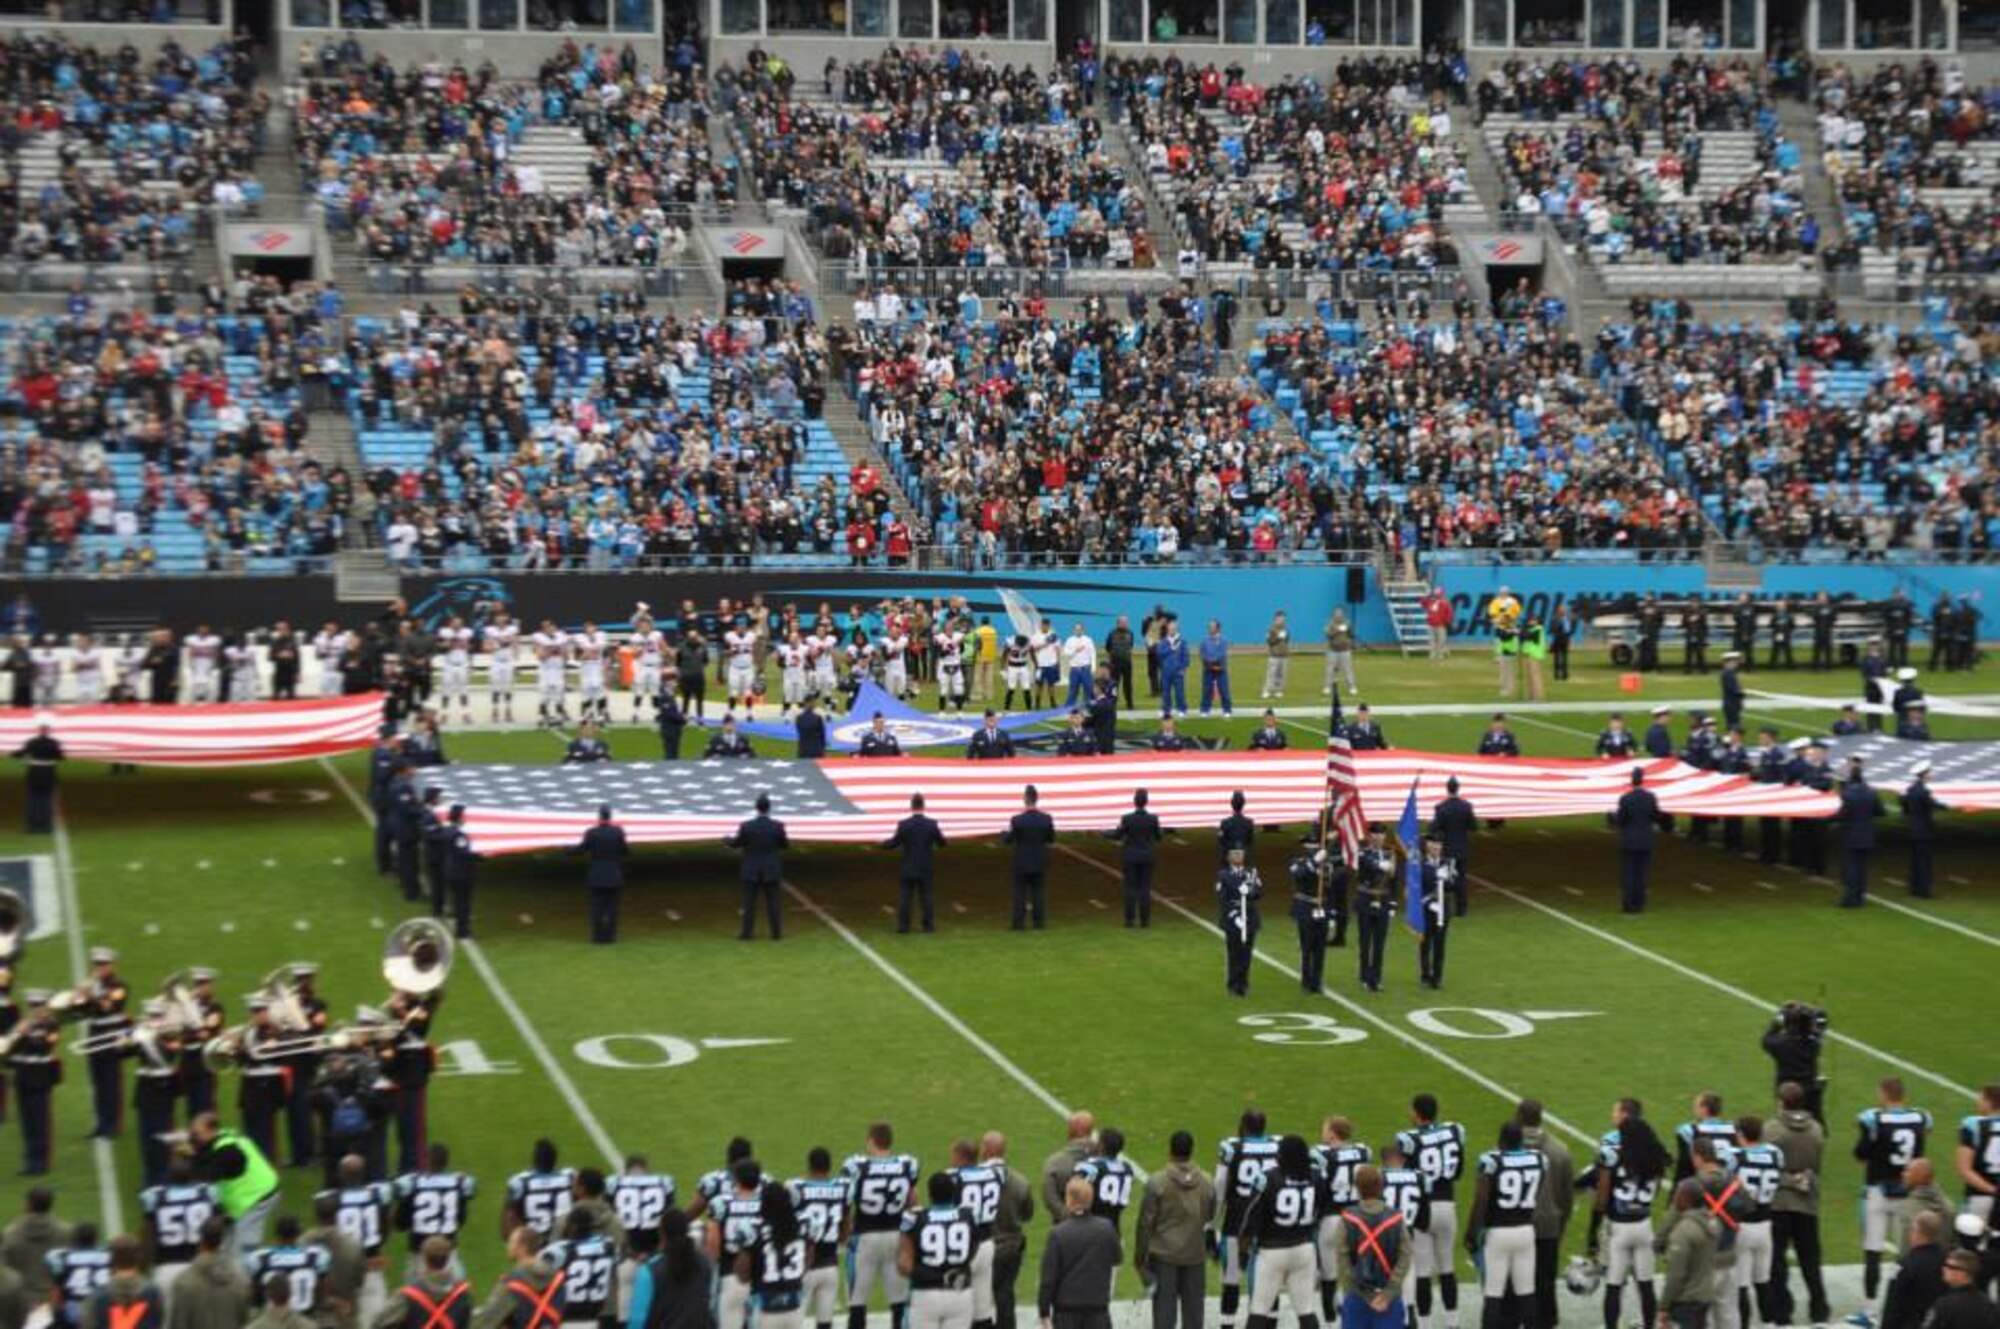 U.S. Air Force Airmen hold a United States flag during the presentation of the colors at the Carolina Panthers Salute to Service game at Bank of America Stadium, Charlotte, N.C., Nov. 16, 2014. The colors were presented by service members from all five branches of the military. (Courtesy photo)